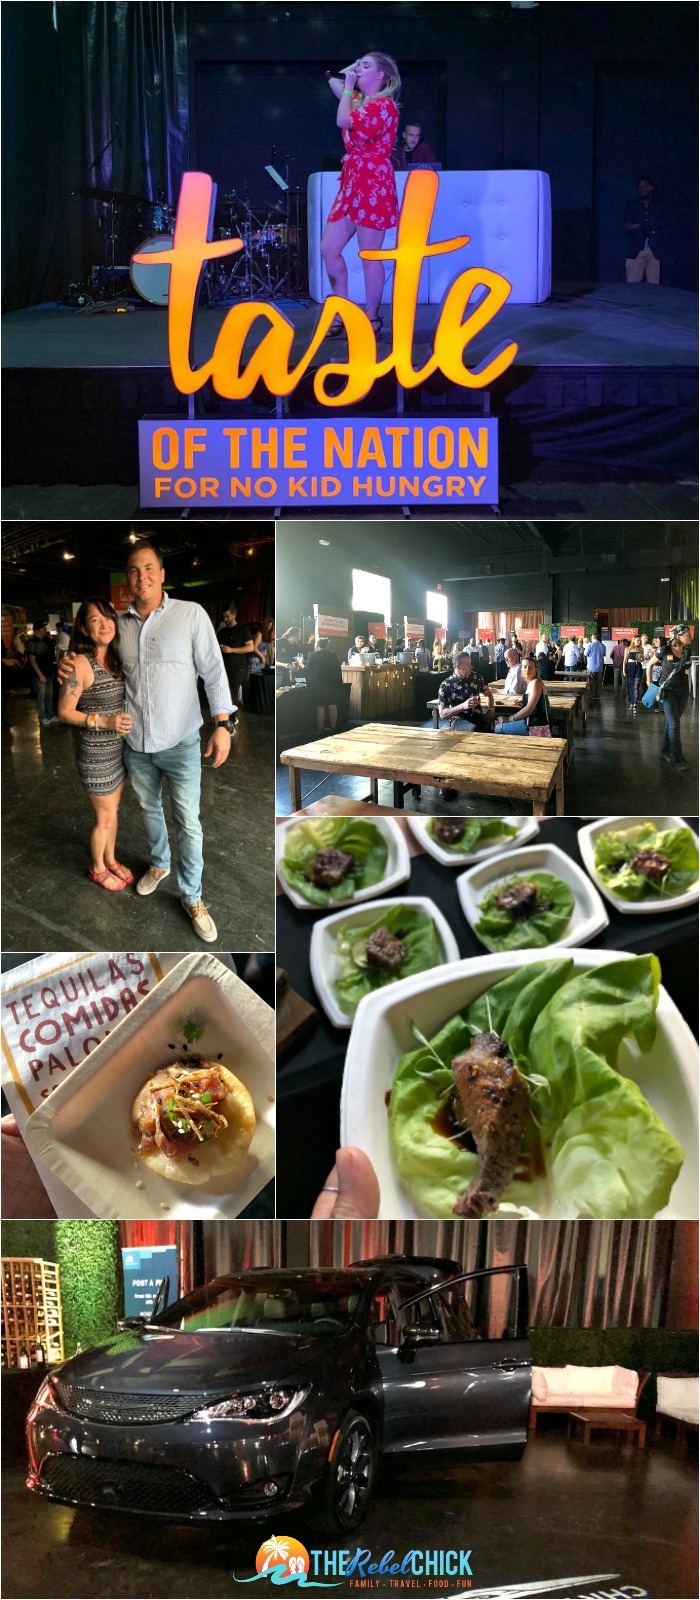 SOUTH FLORIDA’S TASTE OF THE NATION WITH WITH CHRYSLER #PACIFICAS